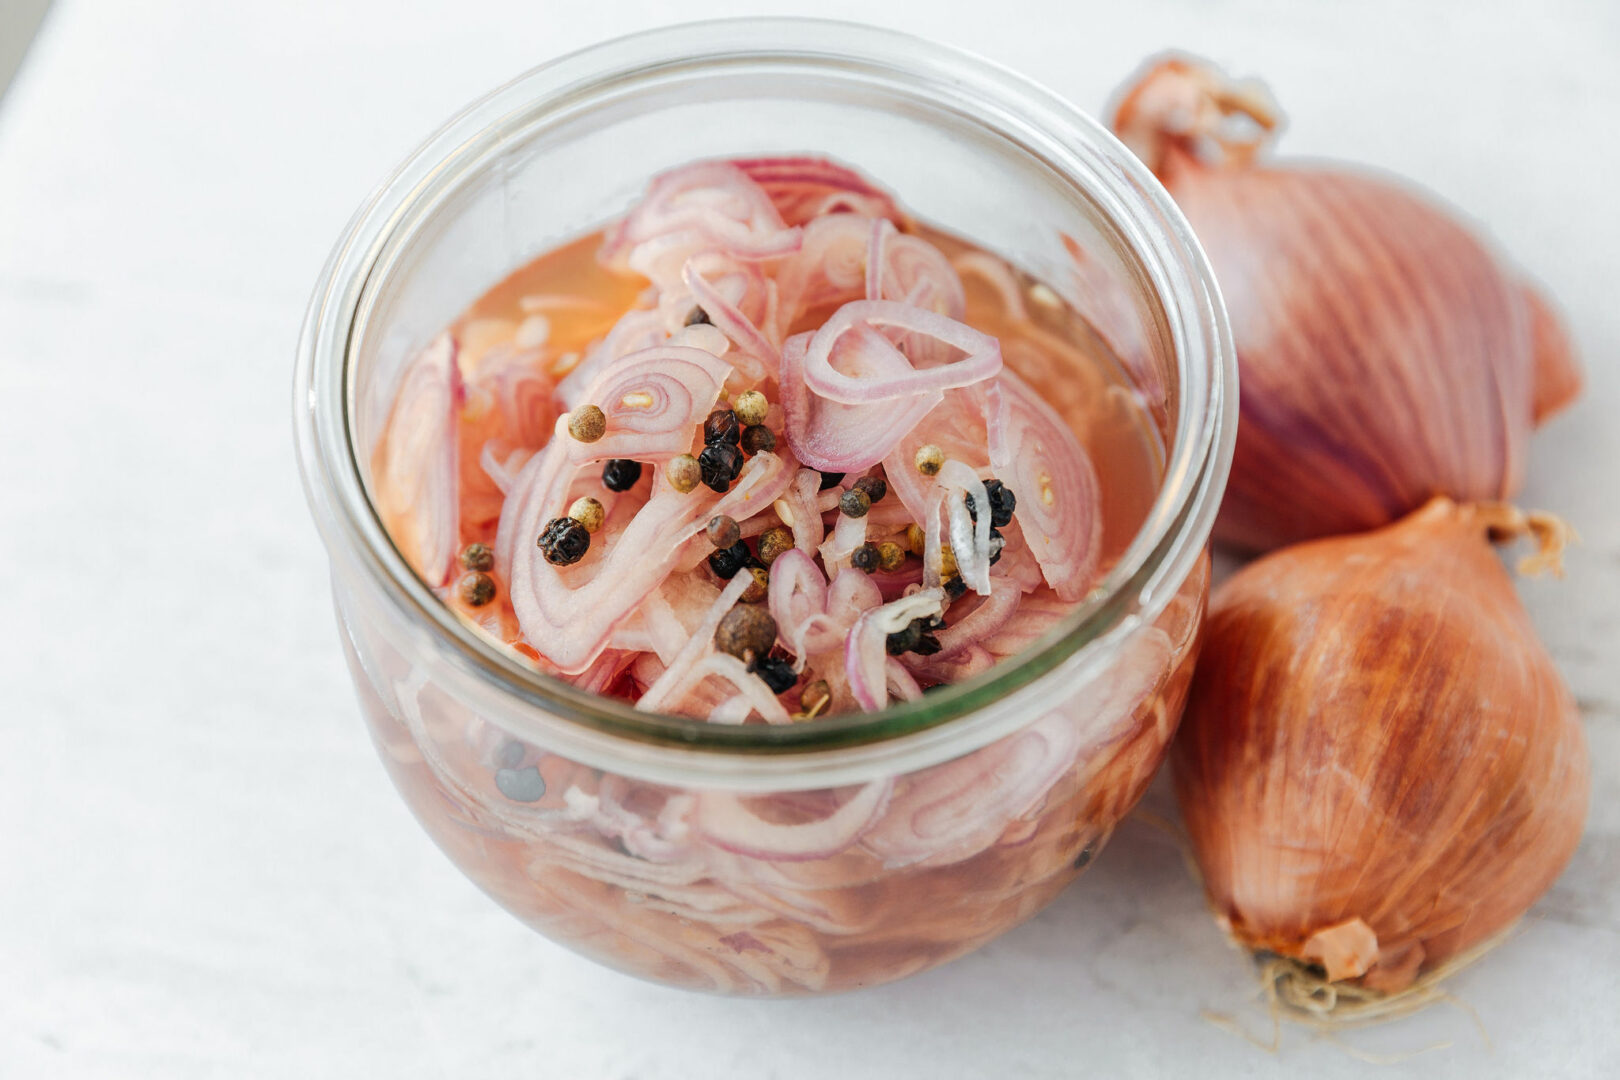 SWEET PICKLED SHALLOTS